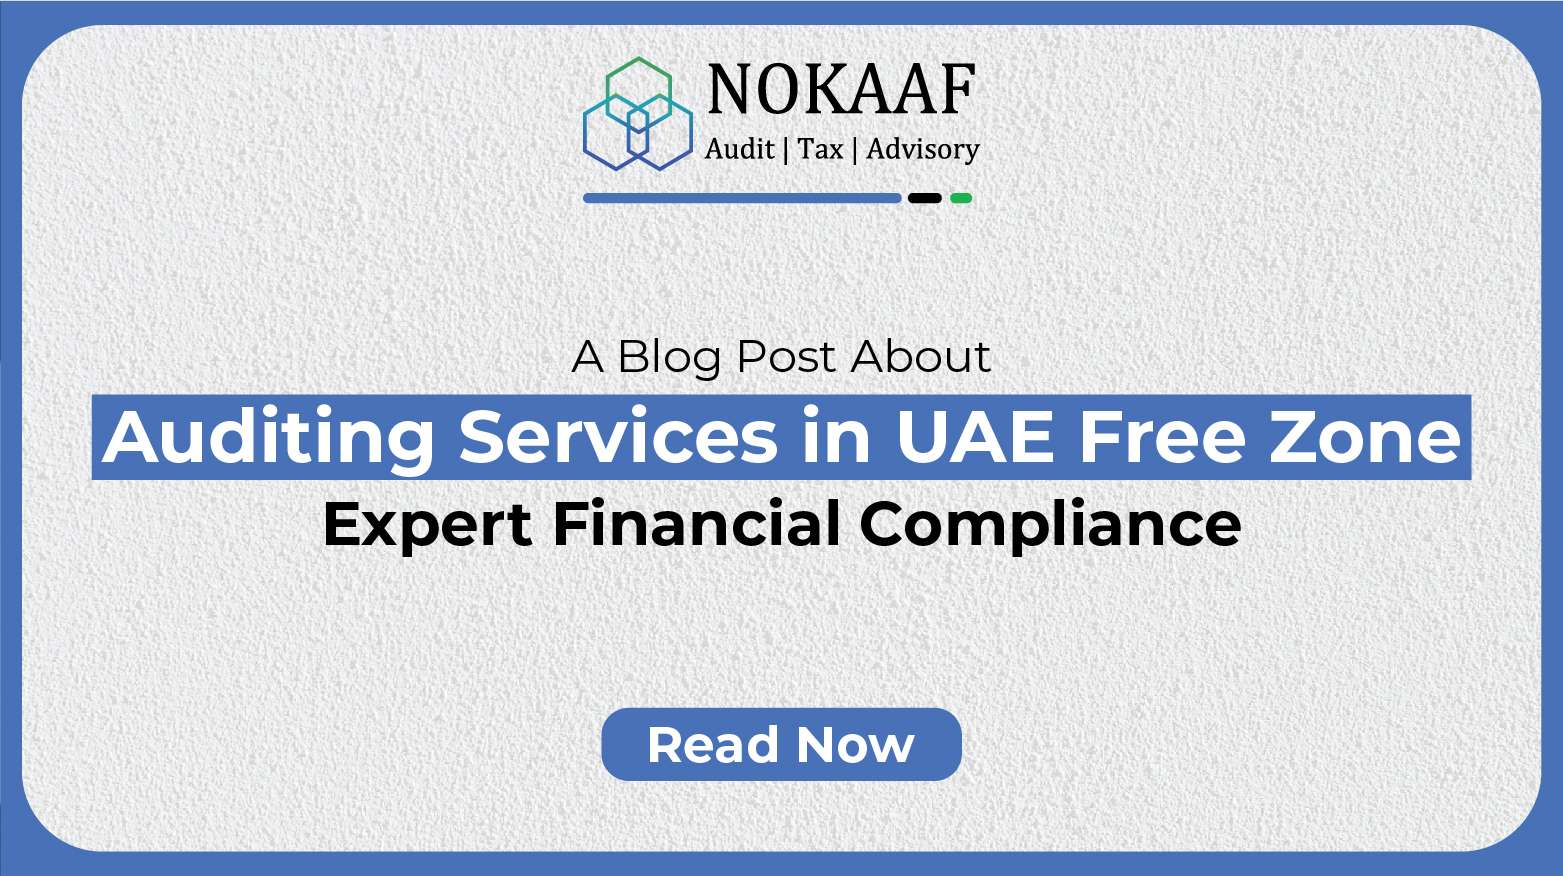 Auditing Services in UAE Free Zone